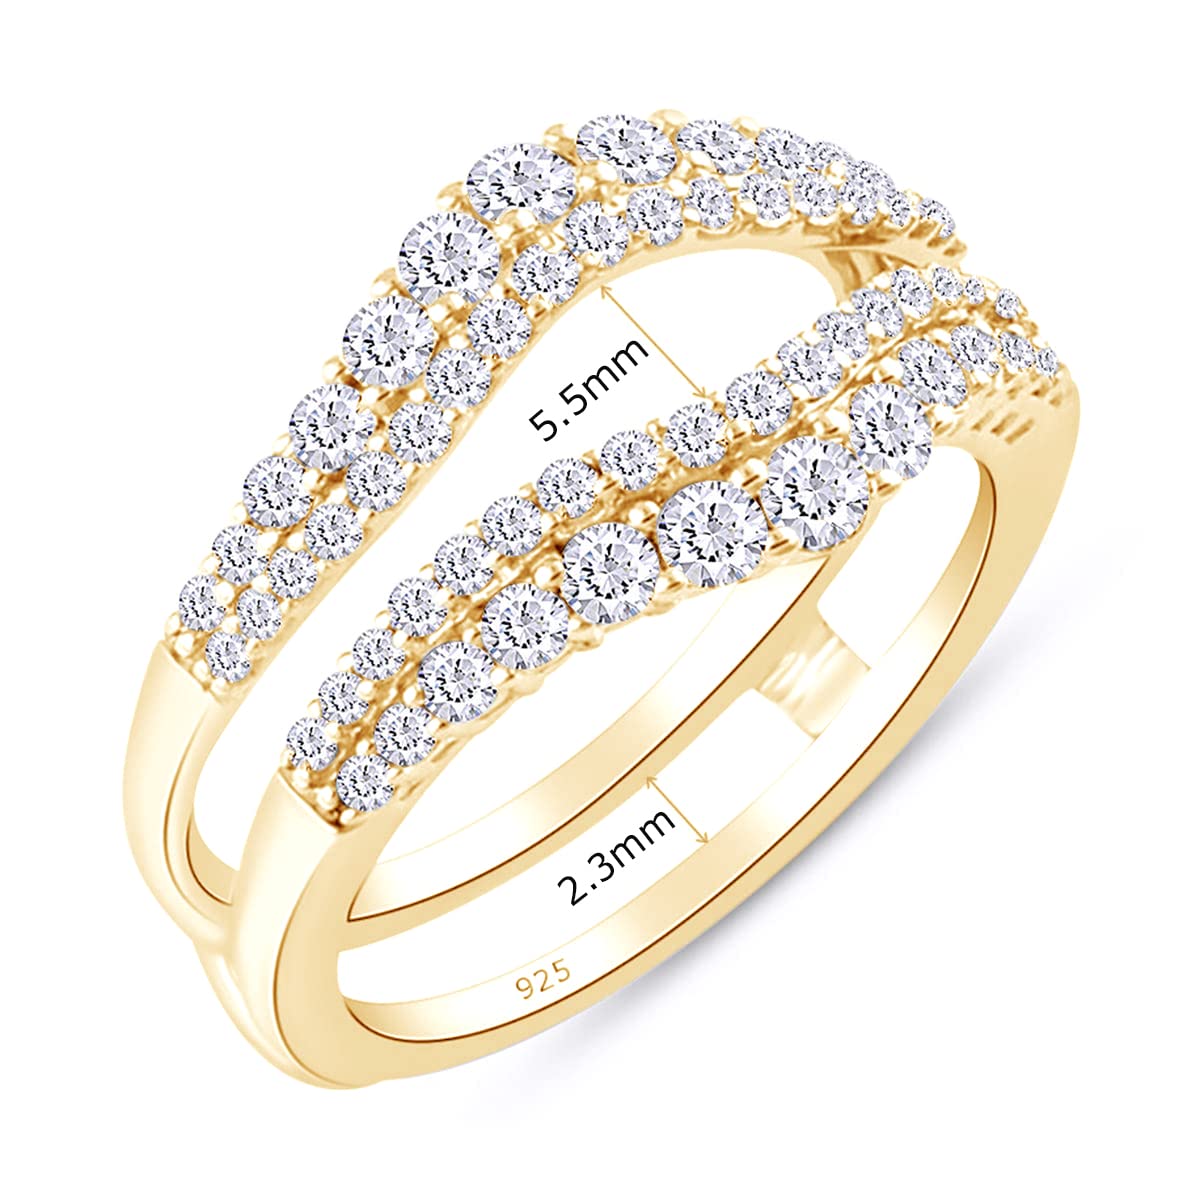 1 ct. t.w Round Lab Created Moissanite Diamond Double Row Pave Set Curved Enhancer Guard Ring In 14K Gold Over Sterling Silver Jewelry (1.00 Cttw), Valentine's Day Gift For Her